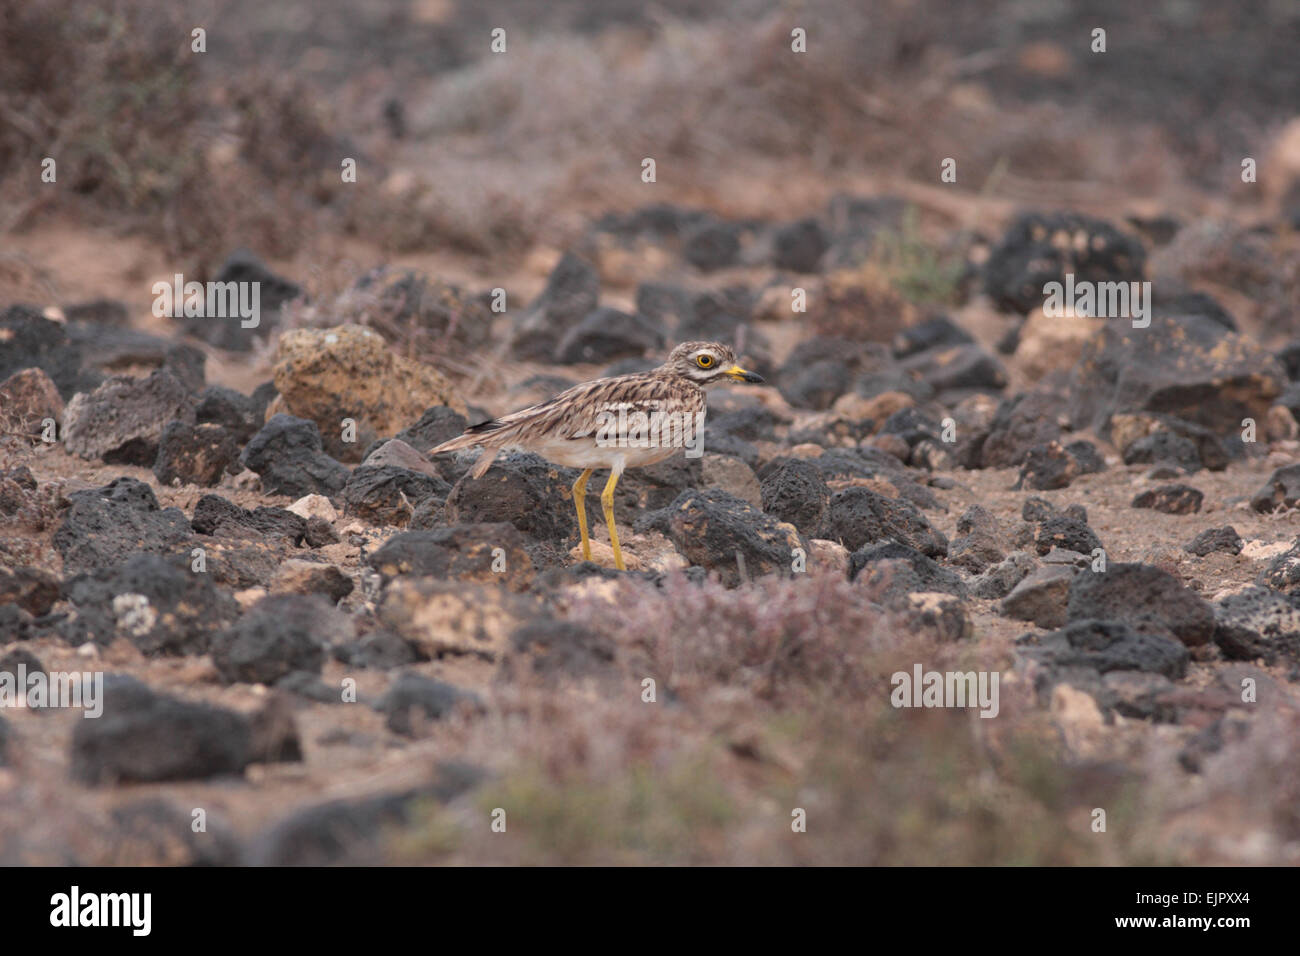 Eurasian Stone-curlew (Burhinus oedicnemus insularum) endemic subspecies, adult, standing amongst volcanic rocks, Teguise Plain, Lanzarote, Canary Islands, March Stock Photo